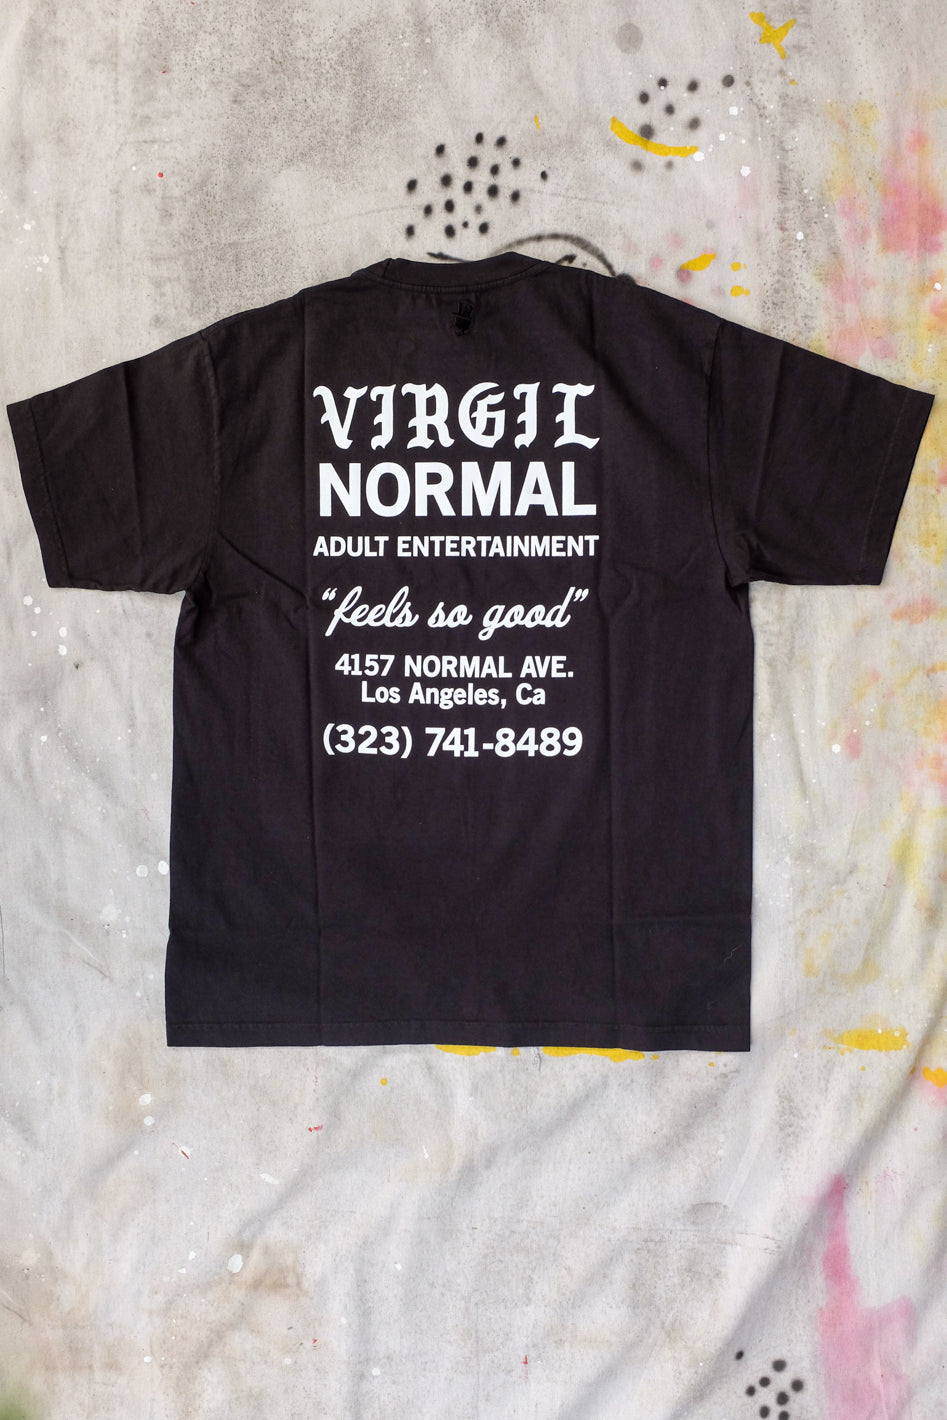 T-shirts  Clothing and Home Goods in Los Angeles - Virgil Normal